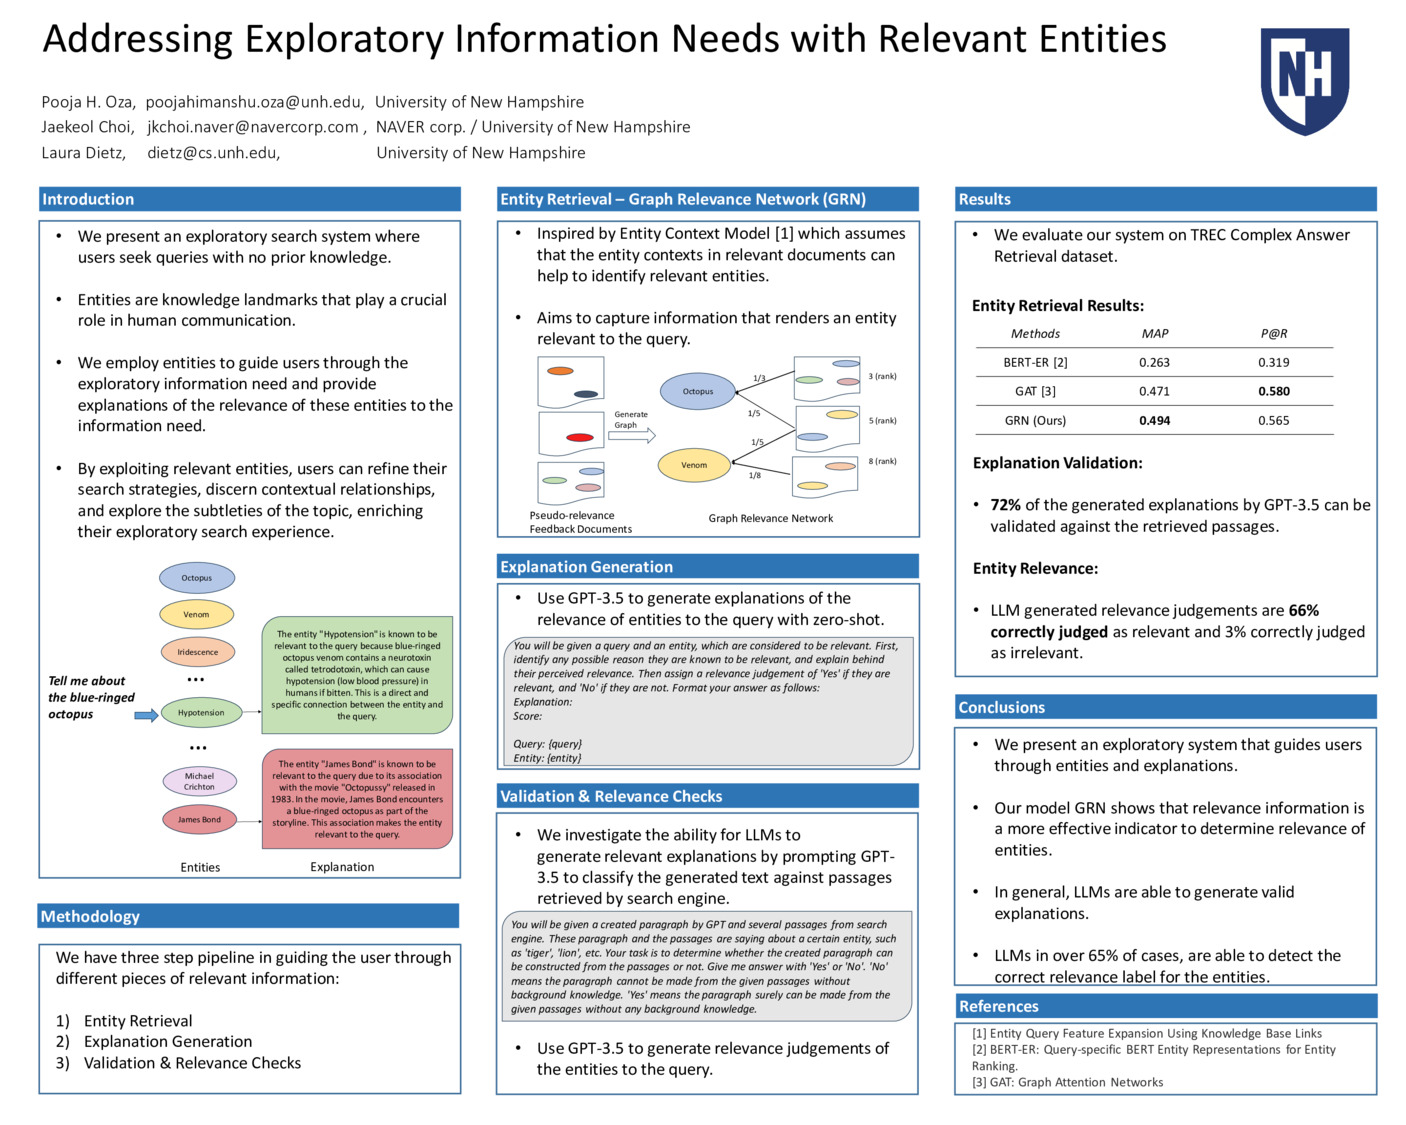 Addressing Exploratory Information Needs With Relevant Entities by pho1003